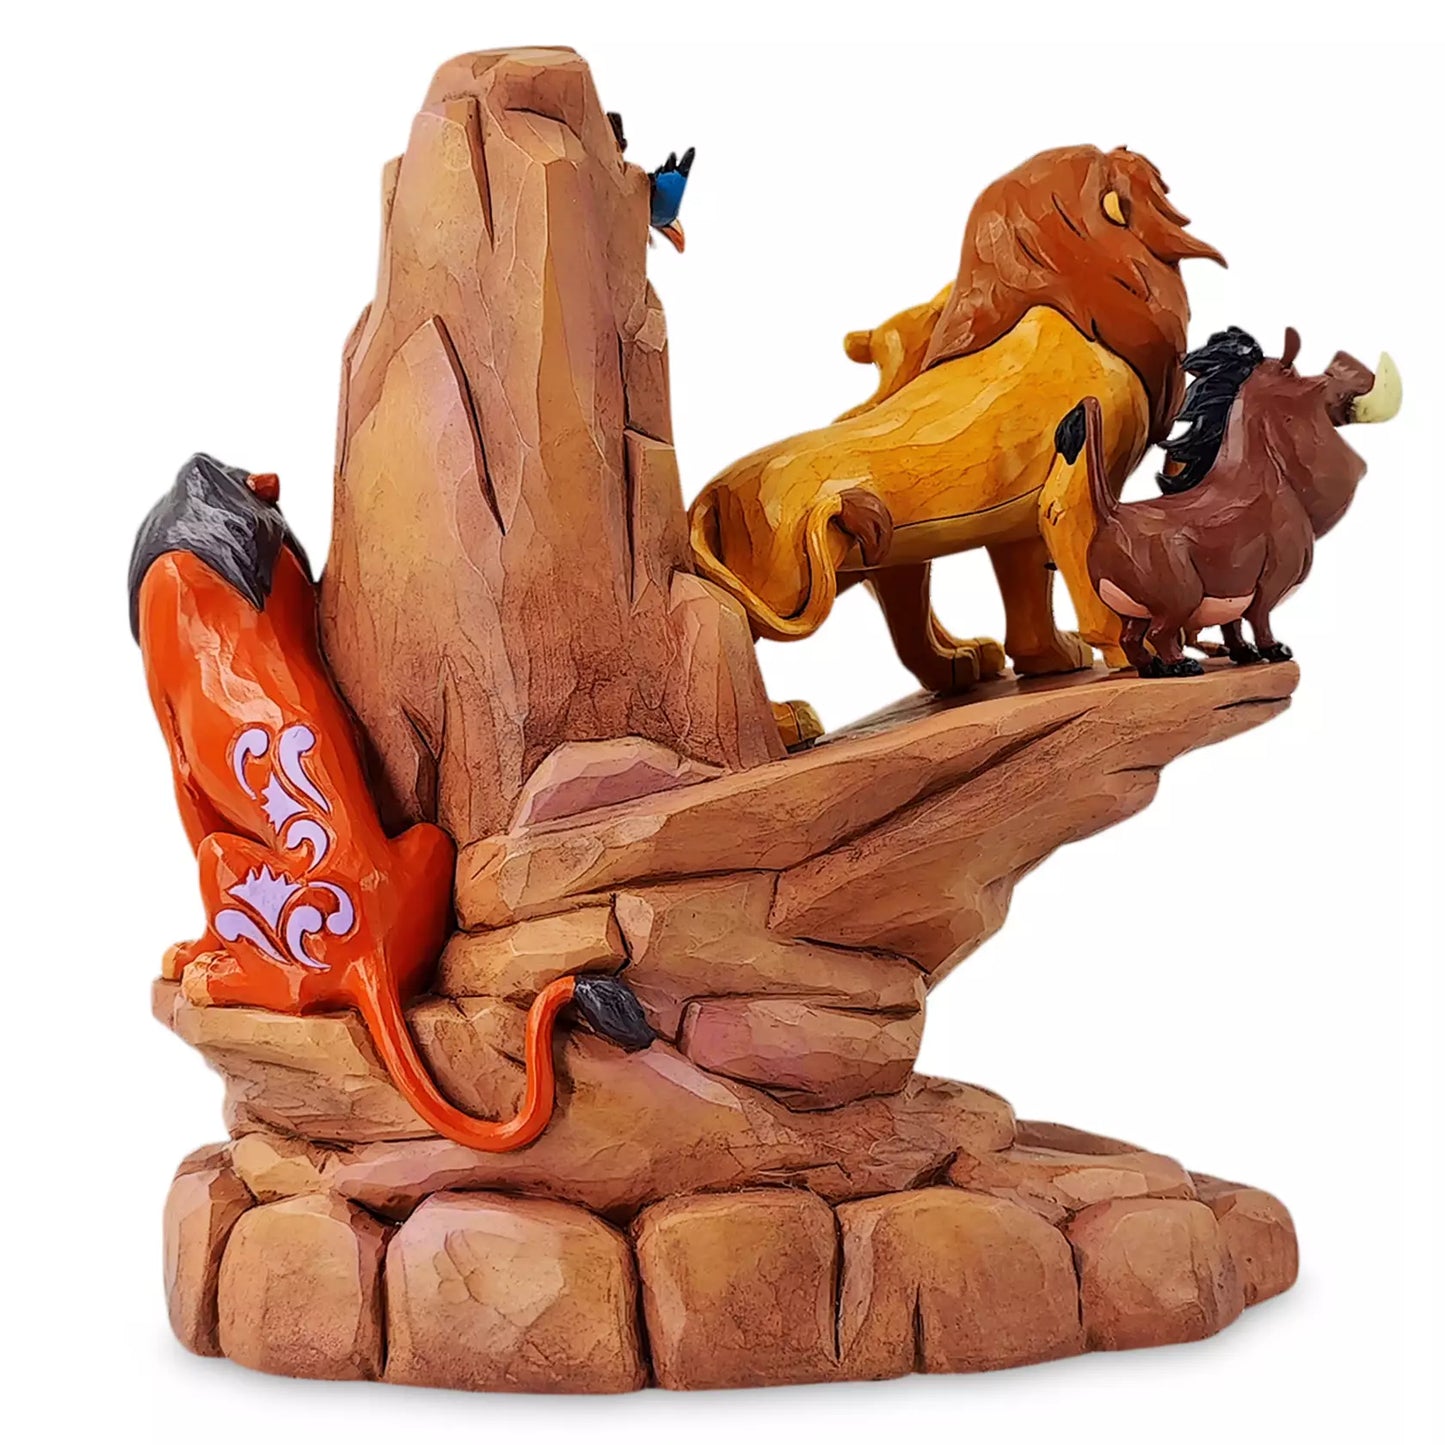 The Lion King "Pride Rock" Disney Traditions Statue by Jim Shore